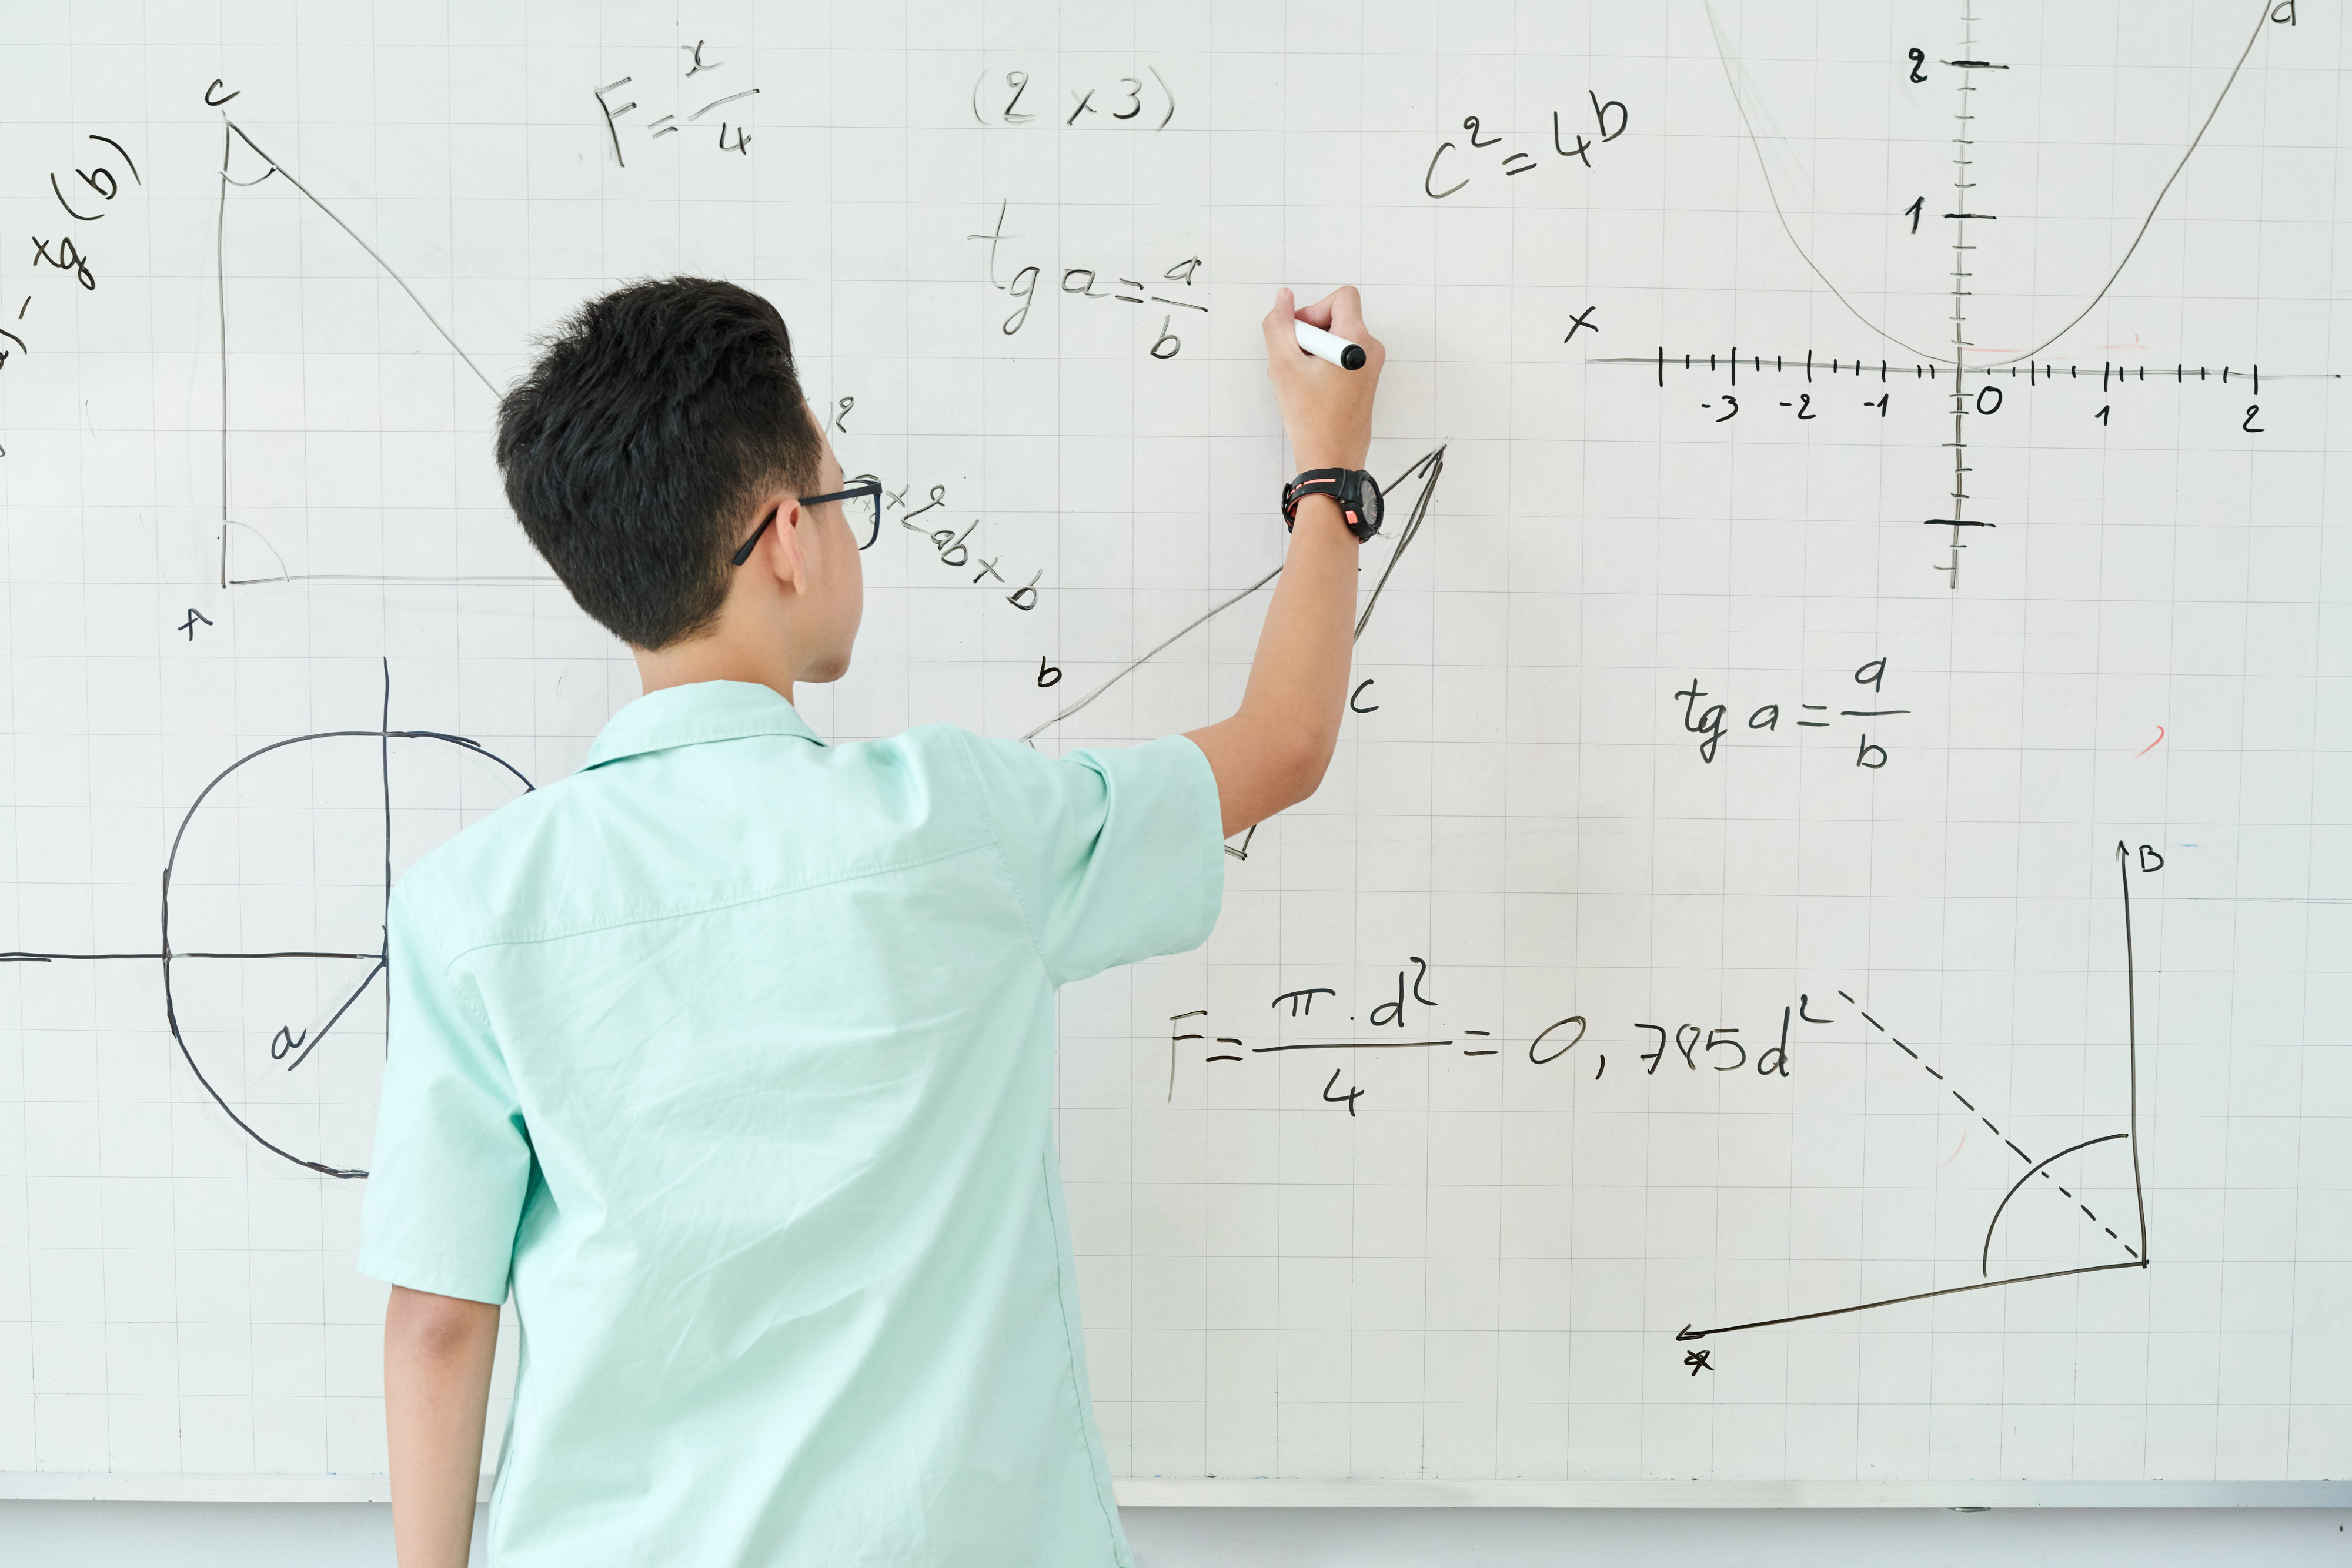 A person writing various mathematical equations and graphs on a whiteboard